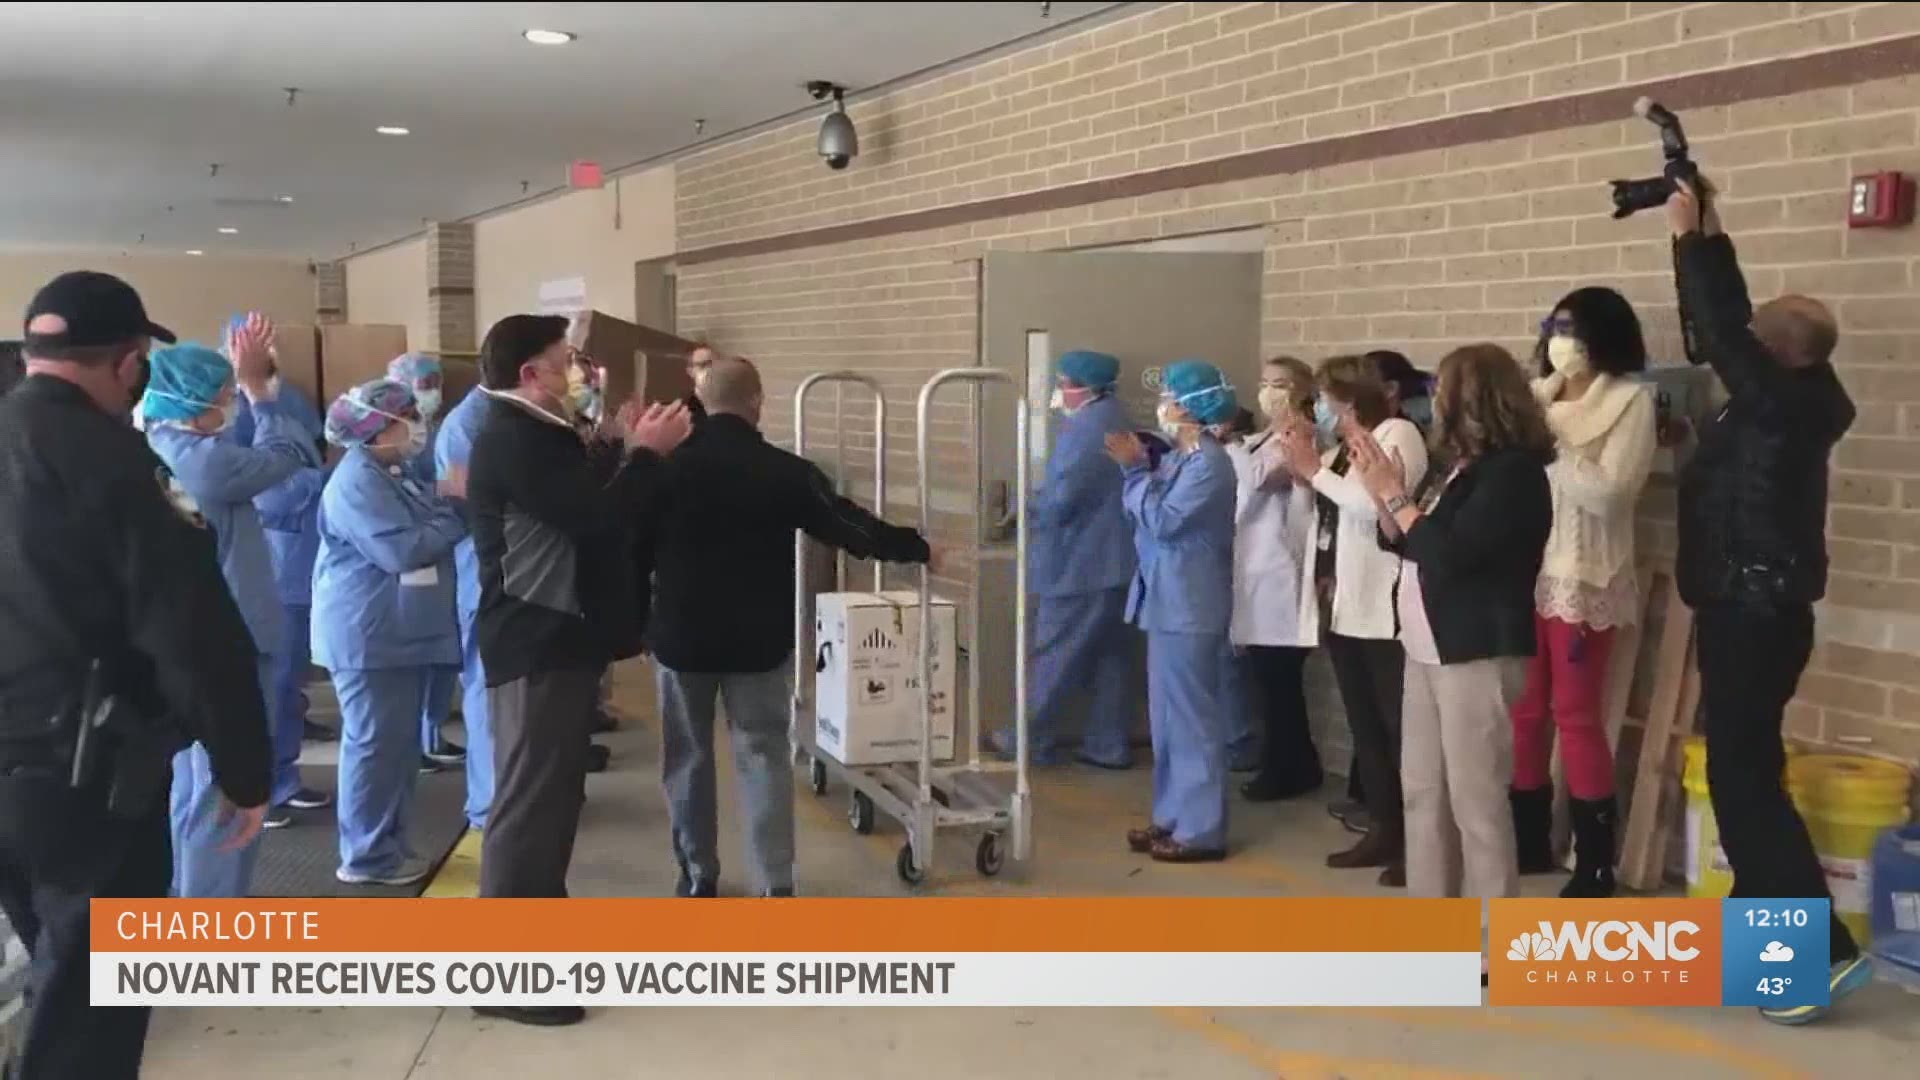 Novant Health announced Thursday it received its first shipment of Pfizer's COVID-19 vaccine, which received approval earlier this month.